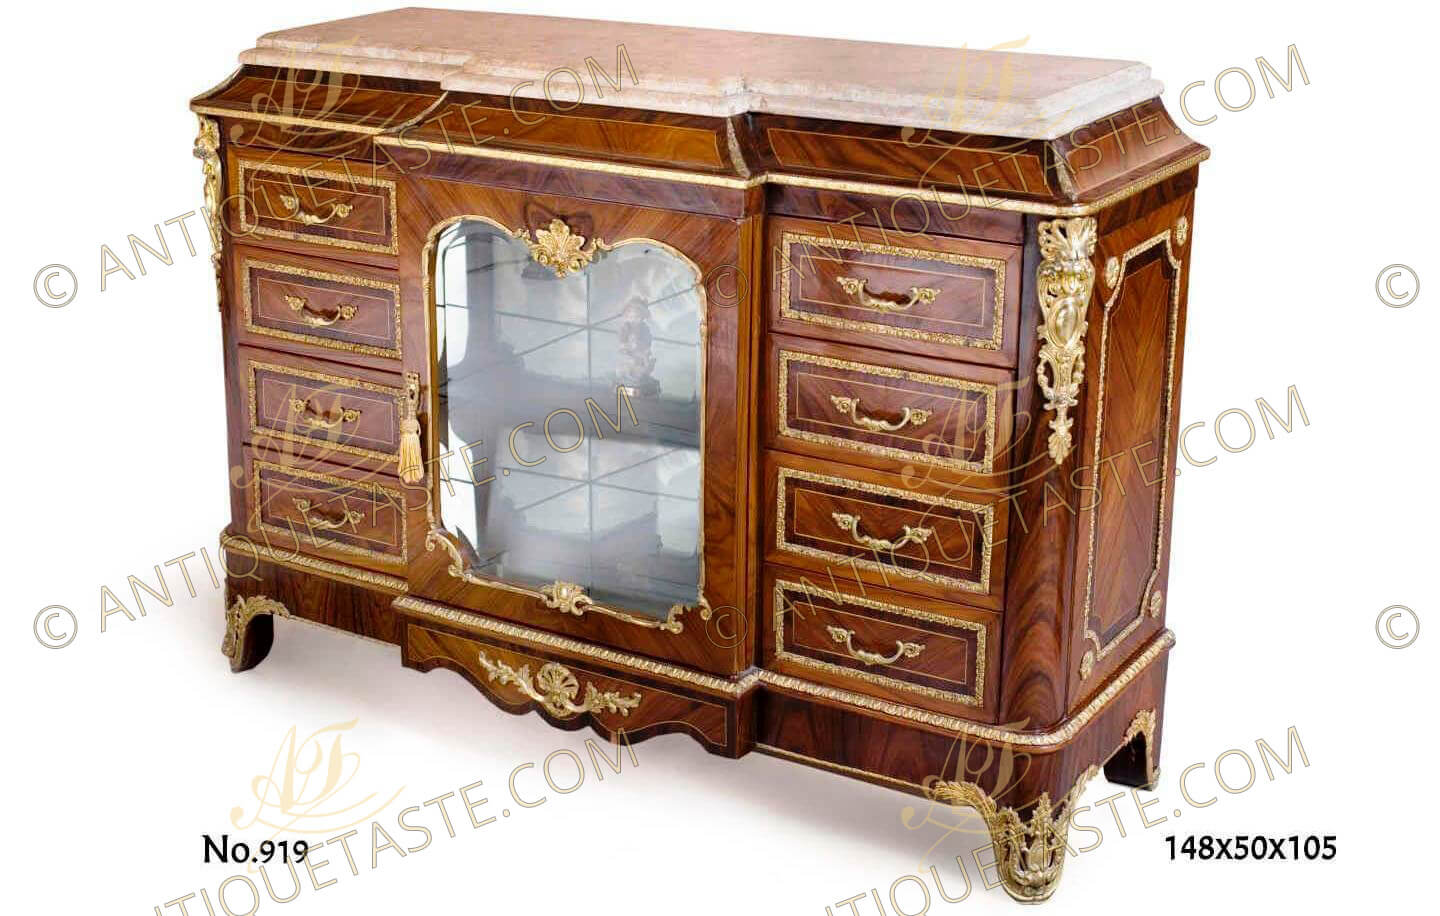 A fine Transitional style gilt-ormolu-mounted veneer-Inlaid Cartonnier with beveled breakfront marble top above a concave frieze and gilt-ormolu trim, the cabinet is centered by a shallow breakfront cupboard glass door with a glass shelf framed by a gilt-ormolu encadrement with a fine cast gilt-ormolu foliage ornamentation flanked by eight drawers, four drawers to each side cornered by fine chiseled  gilt ormolu foliate mounts, raised on a shaped plinth headed with an ormolu trim inlaid with gilt ormolu foliate sabots on the built-in legs